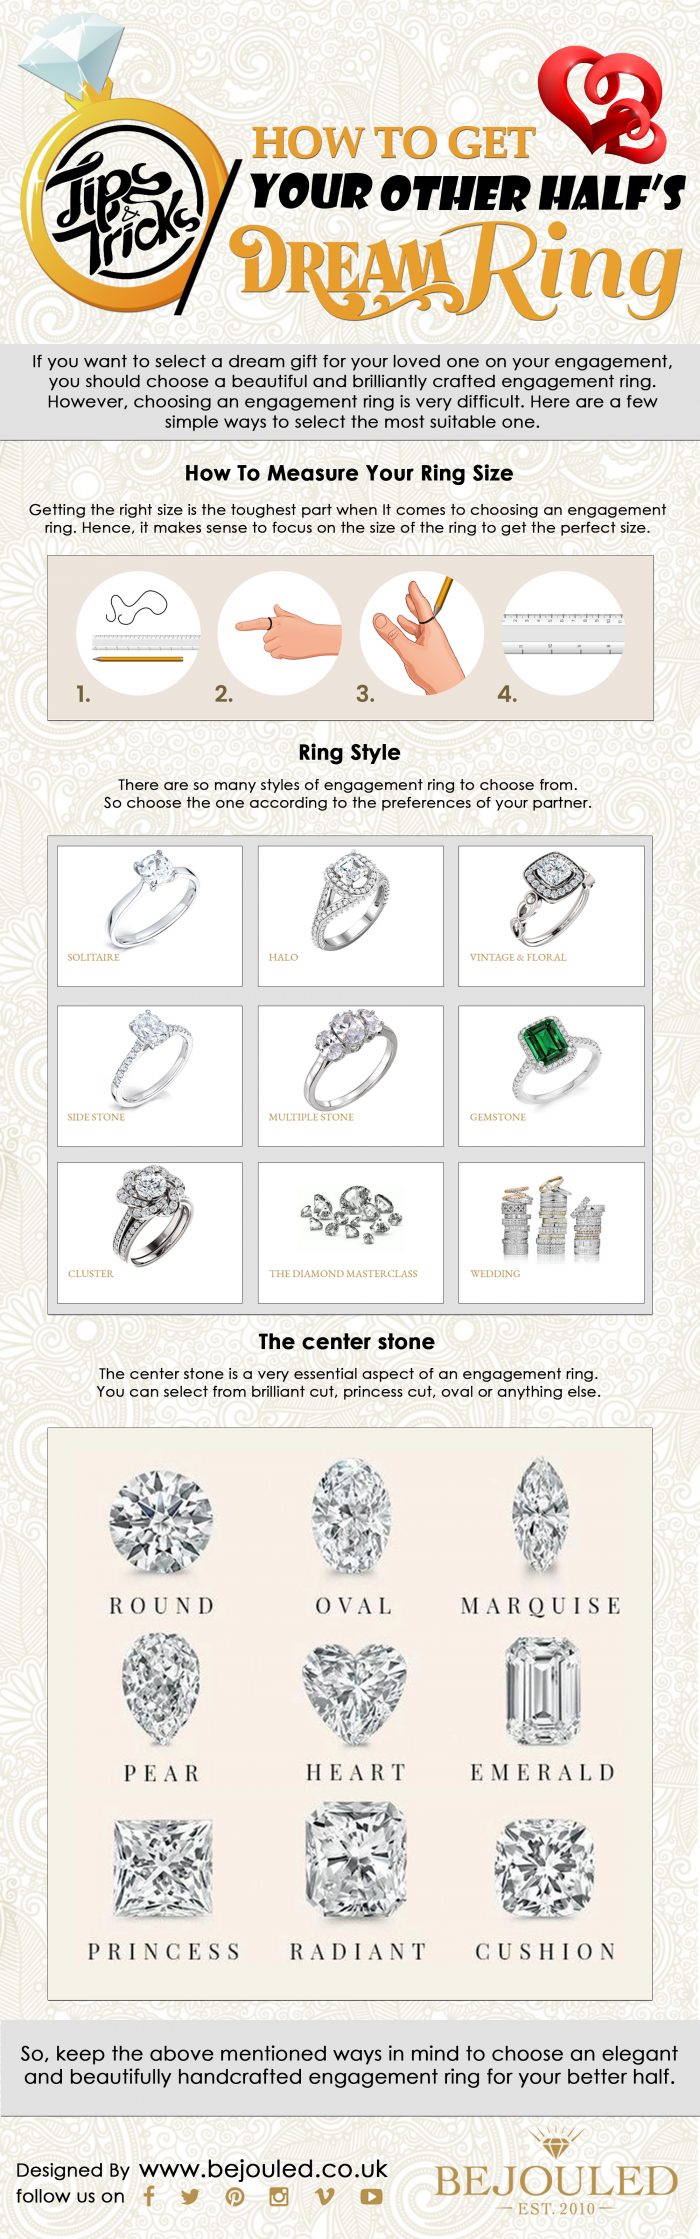 Tips and Tricks How to Get your Other Halfs Dream Ring